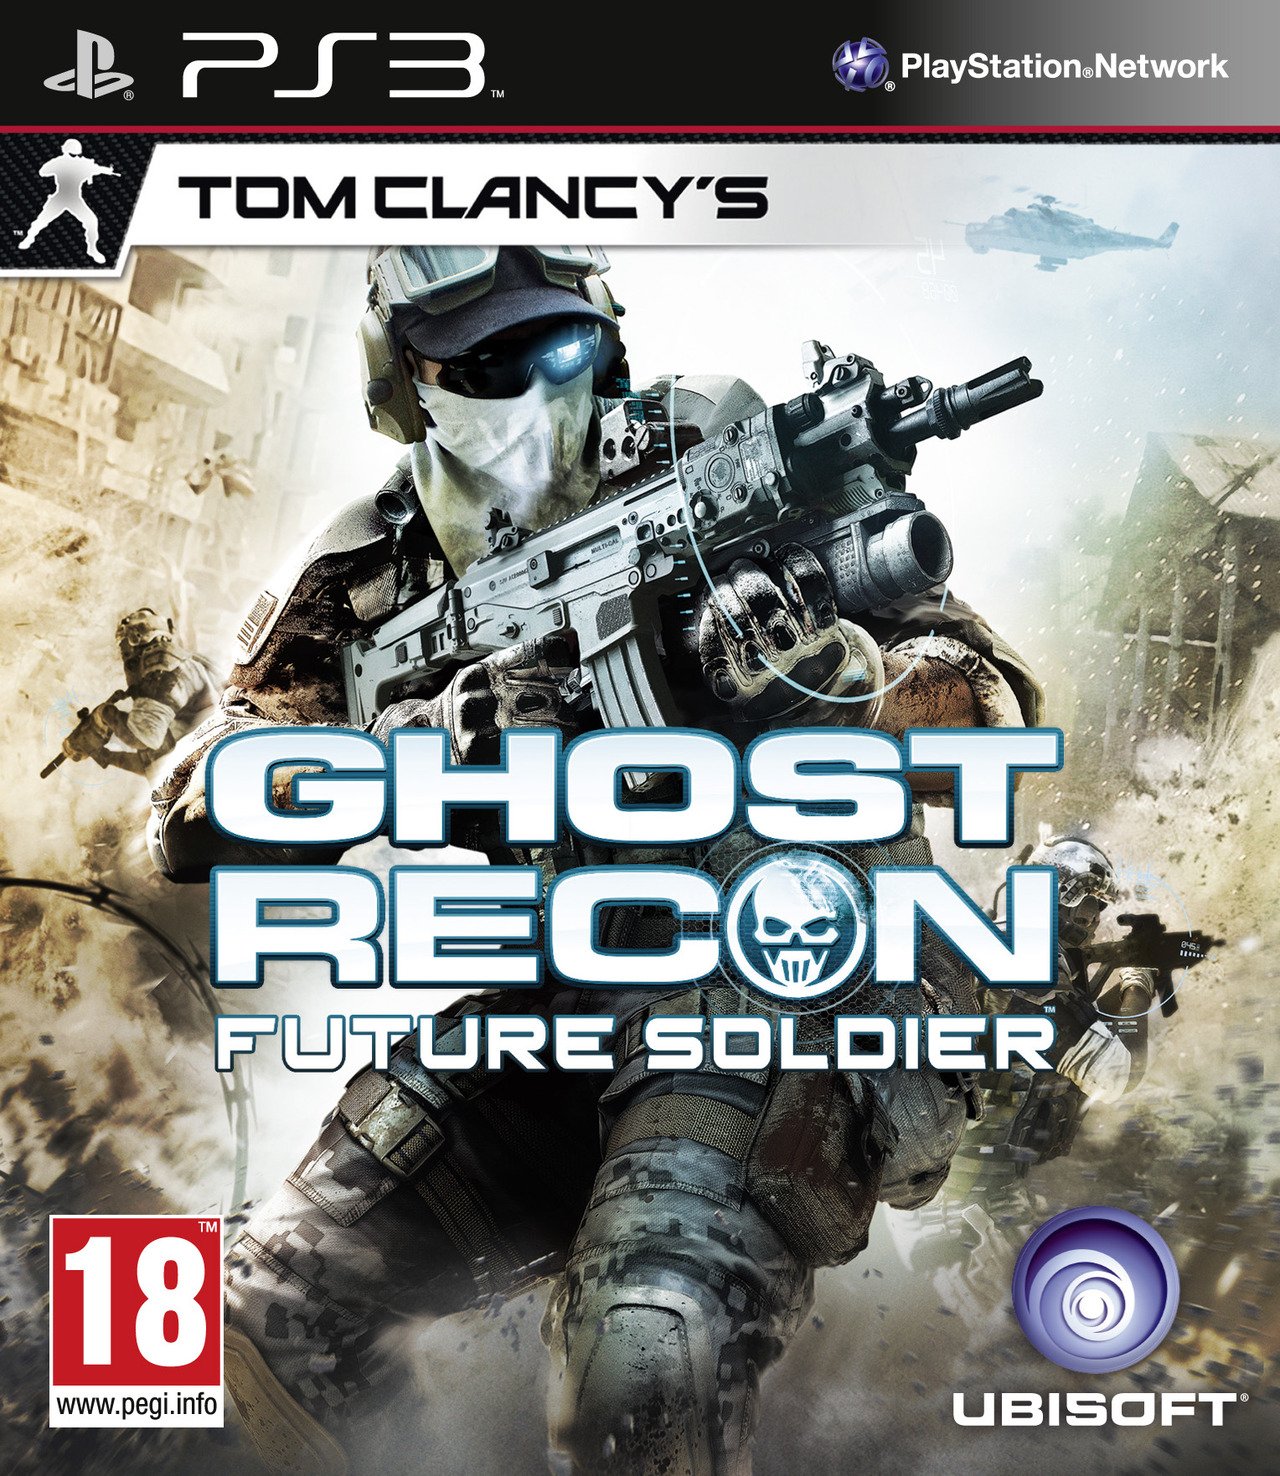 jaquette-ghost-recon-future-soldier-playstation-3-ps3-cover-avant-g-1327589326.jpg